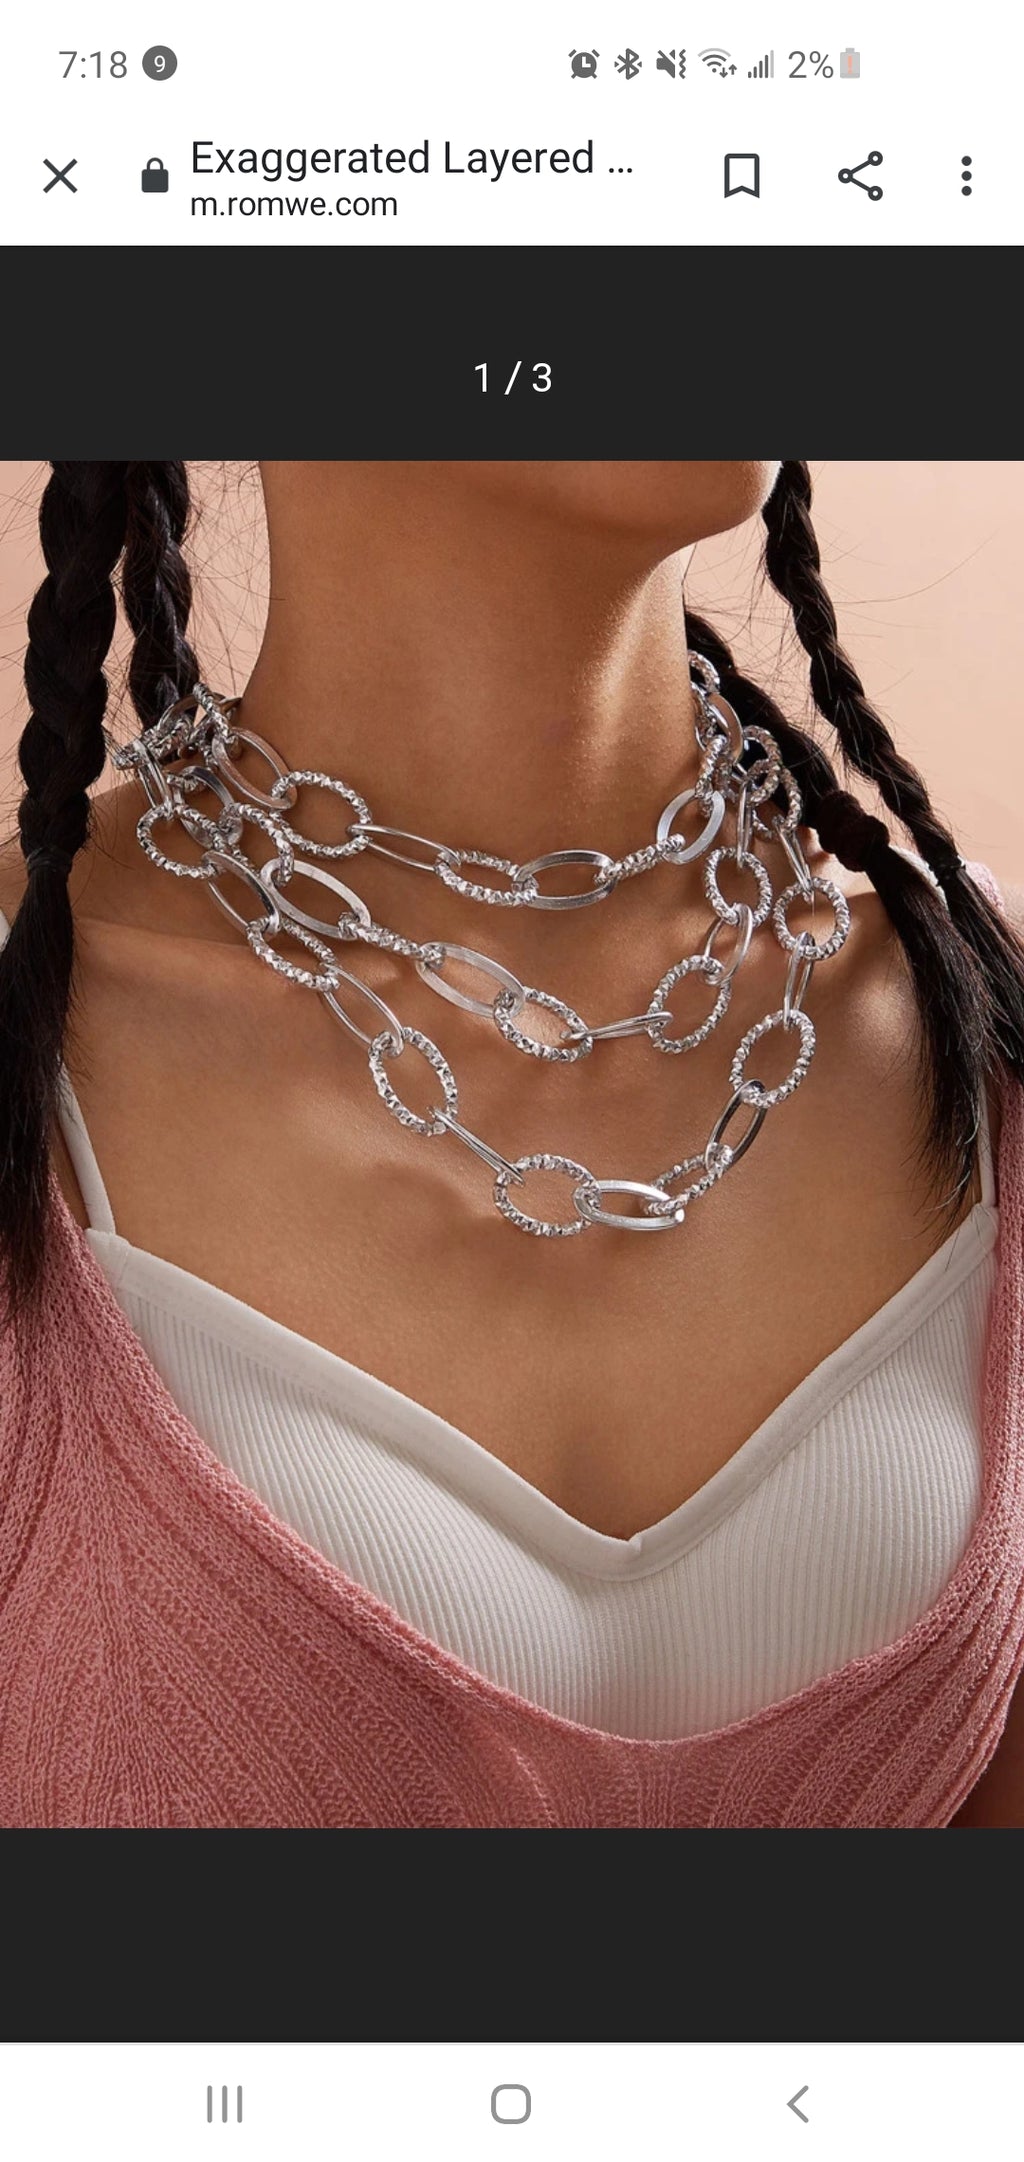 Exaggerated Layers Chain